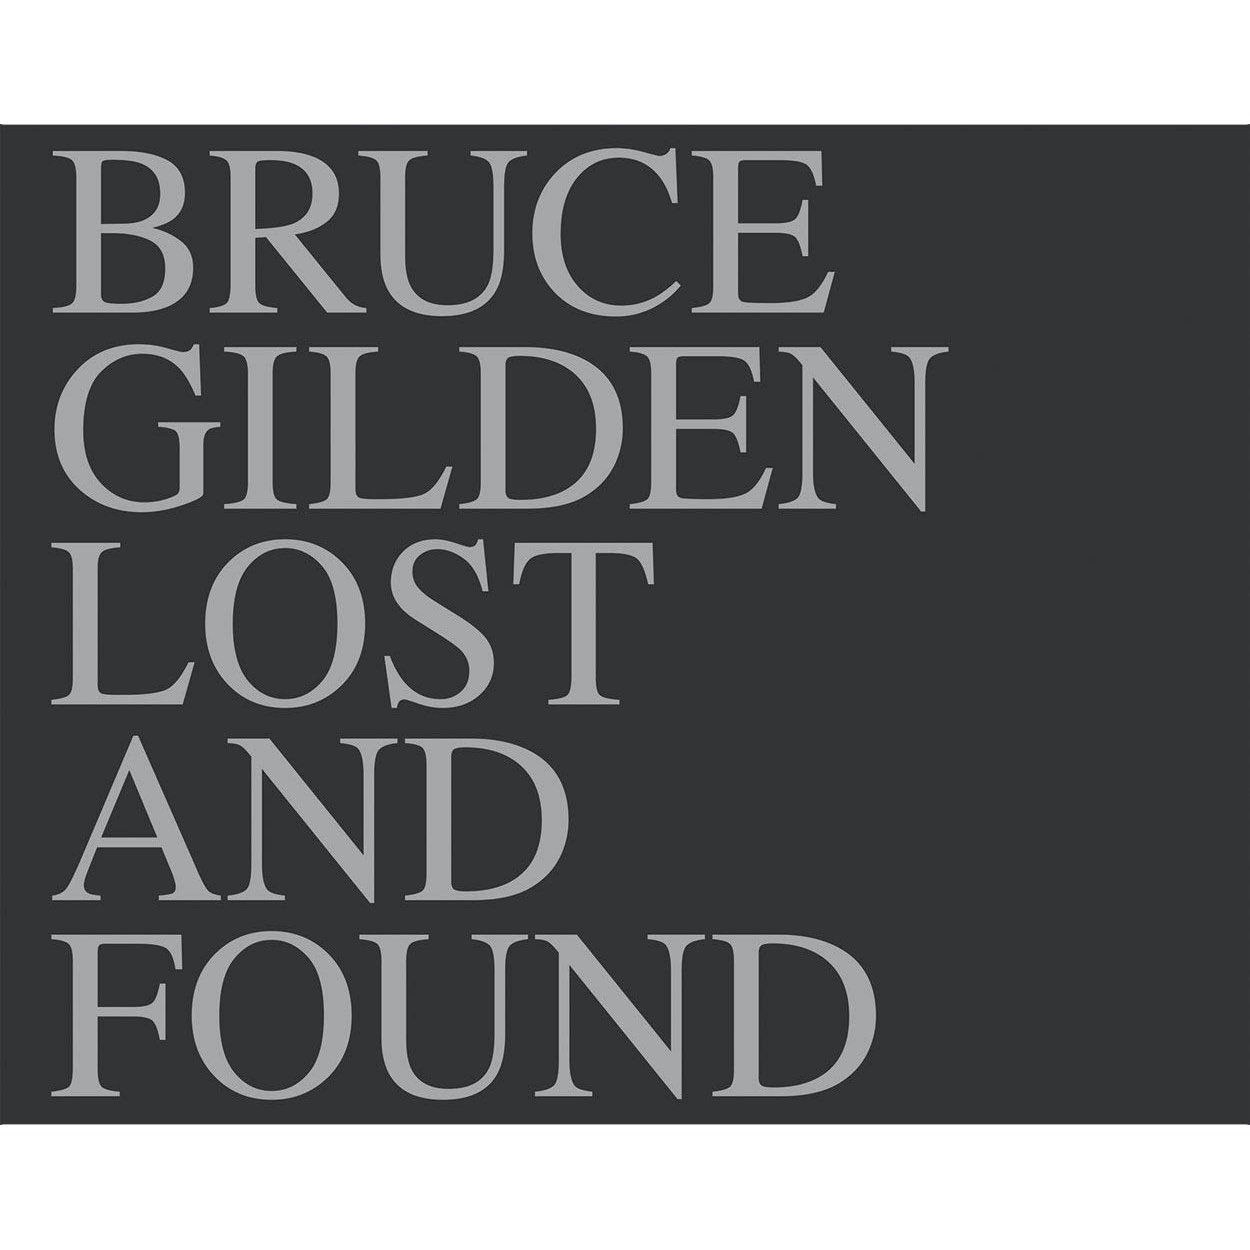 TThumbnail image for LOST AND FOUND - BRUCE GILDEN